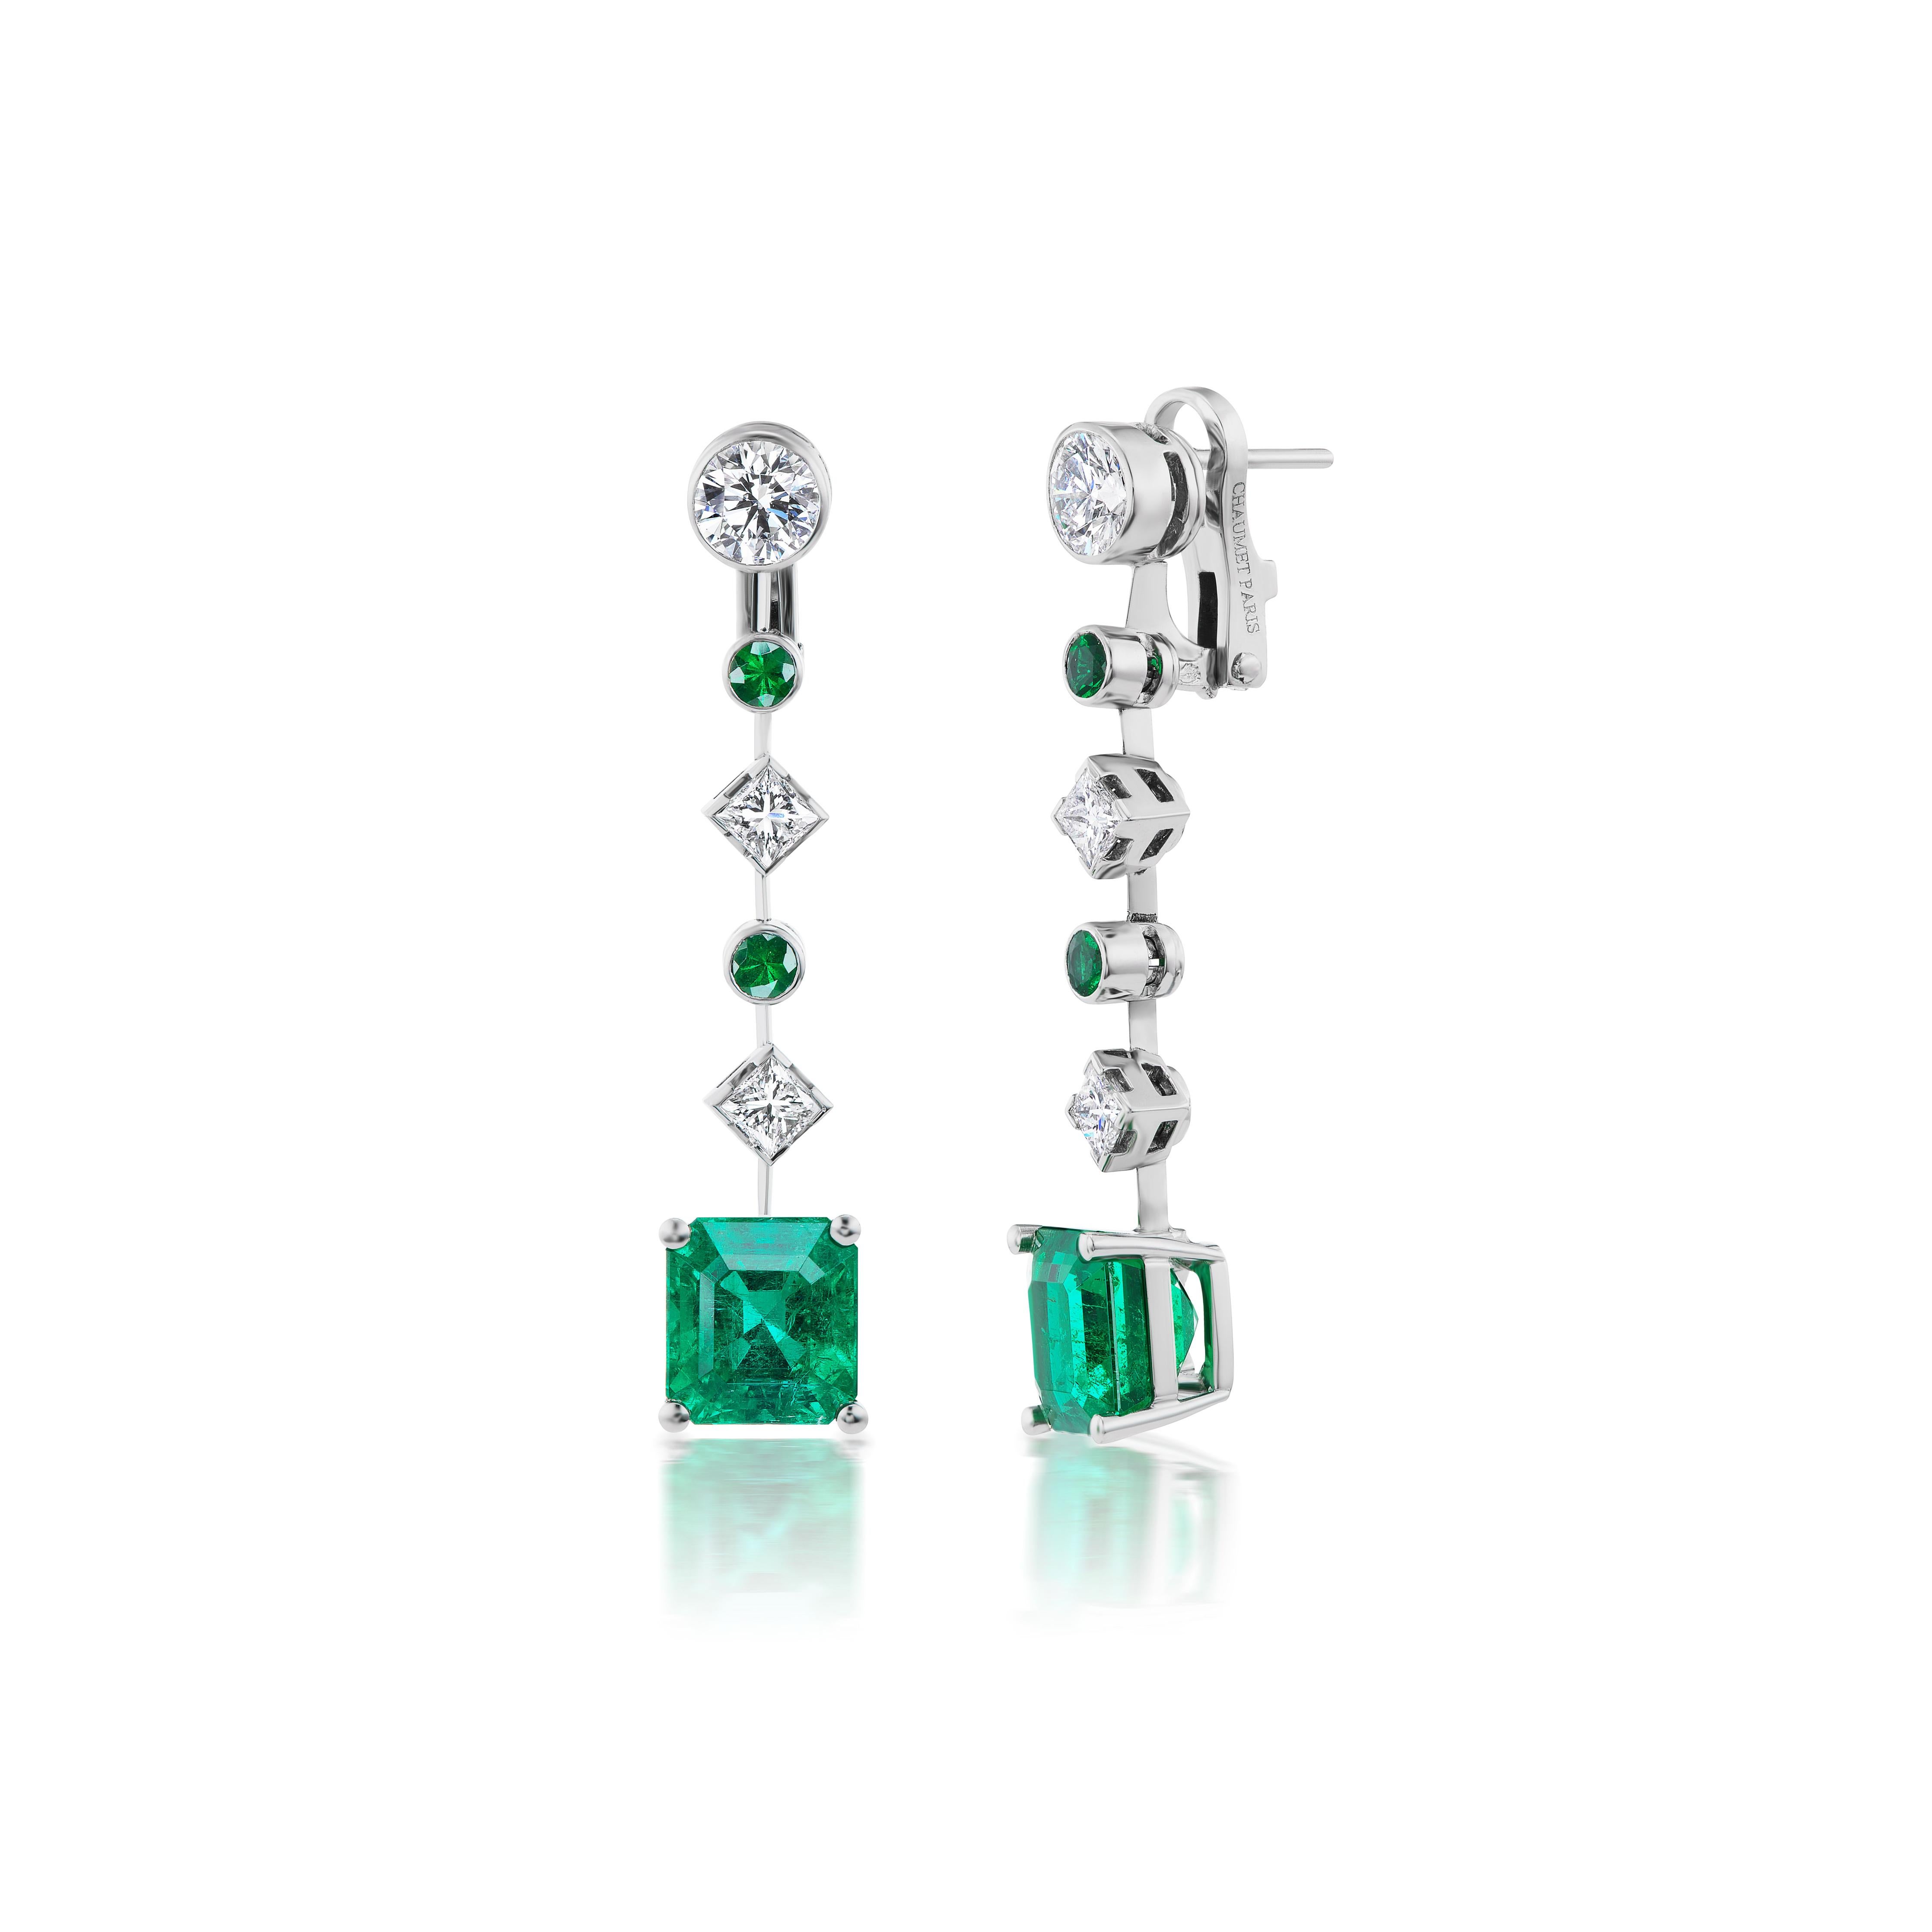 Over the years Chaumet jewels have adorned princes and princesses, dukes and duchesses as well as popes and Hollywood starlets.  Now you can indulge in the epitome of sophistication with these extraordinary Colombian emerald and diamond